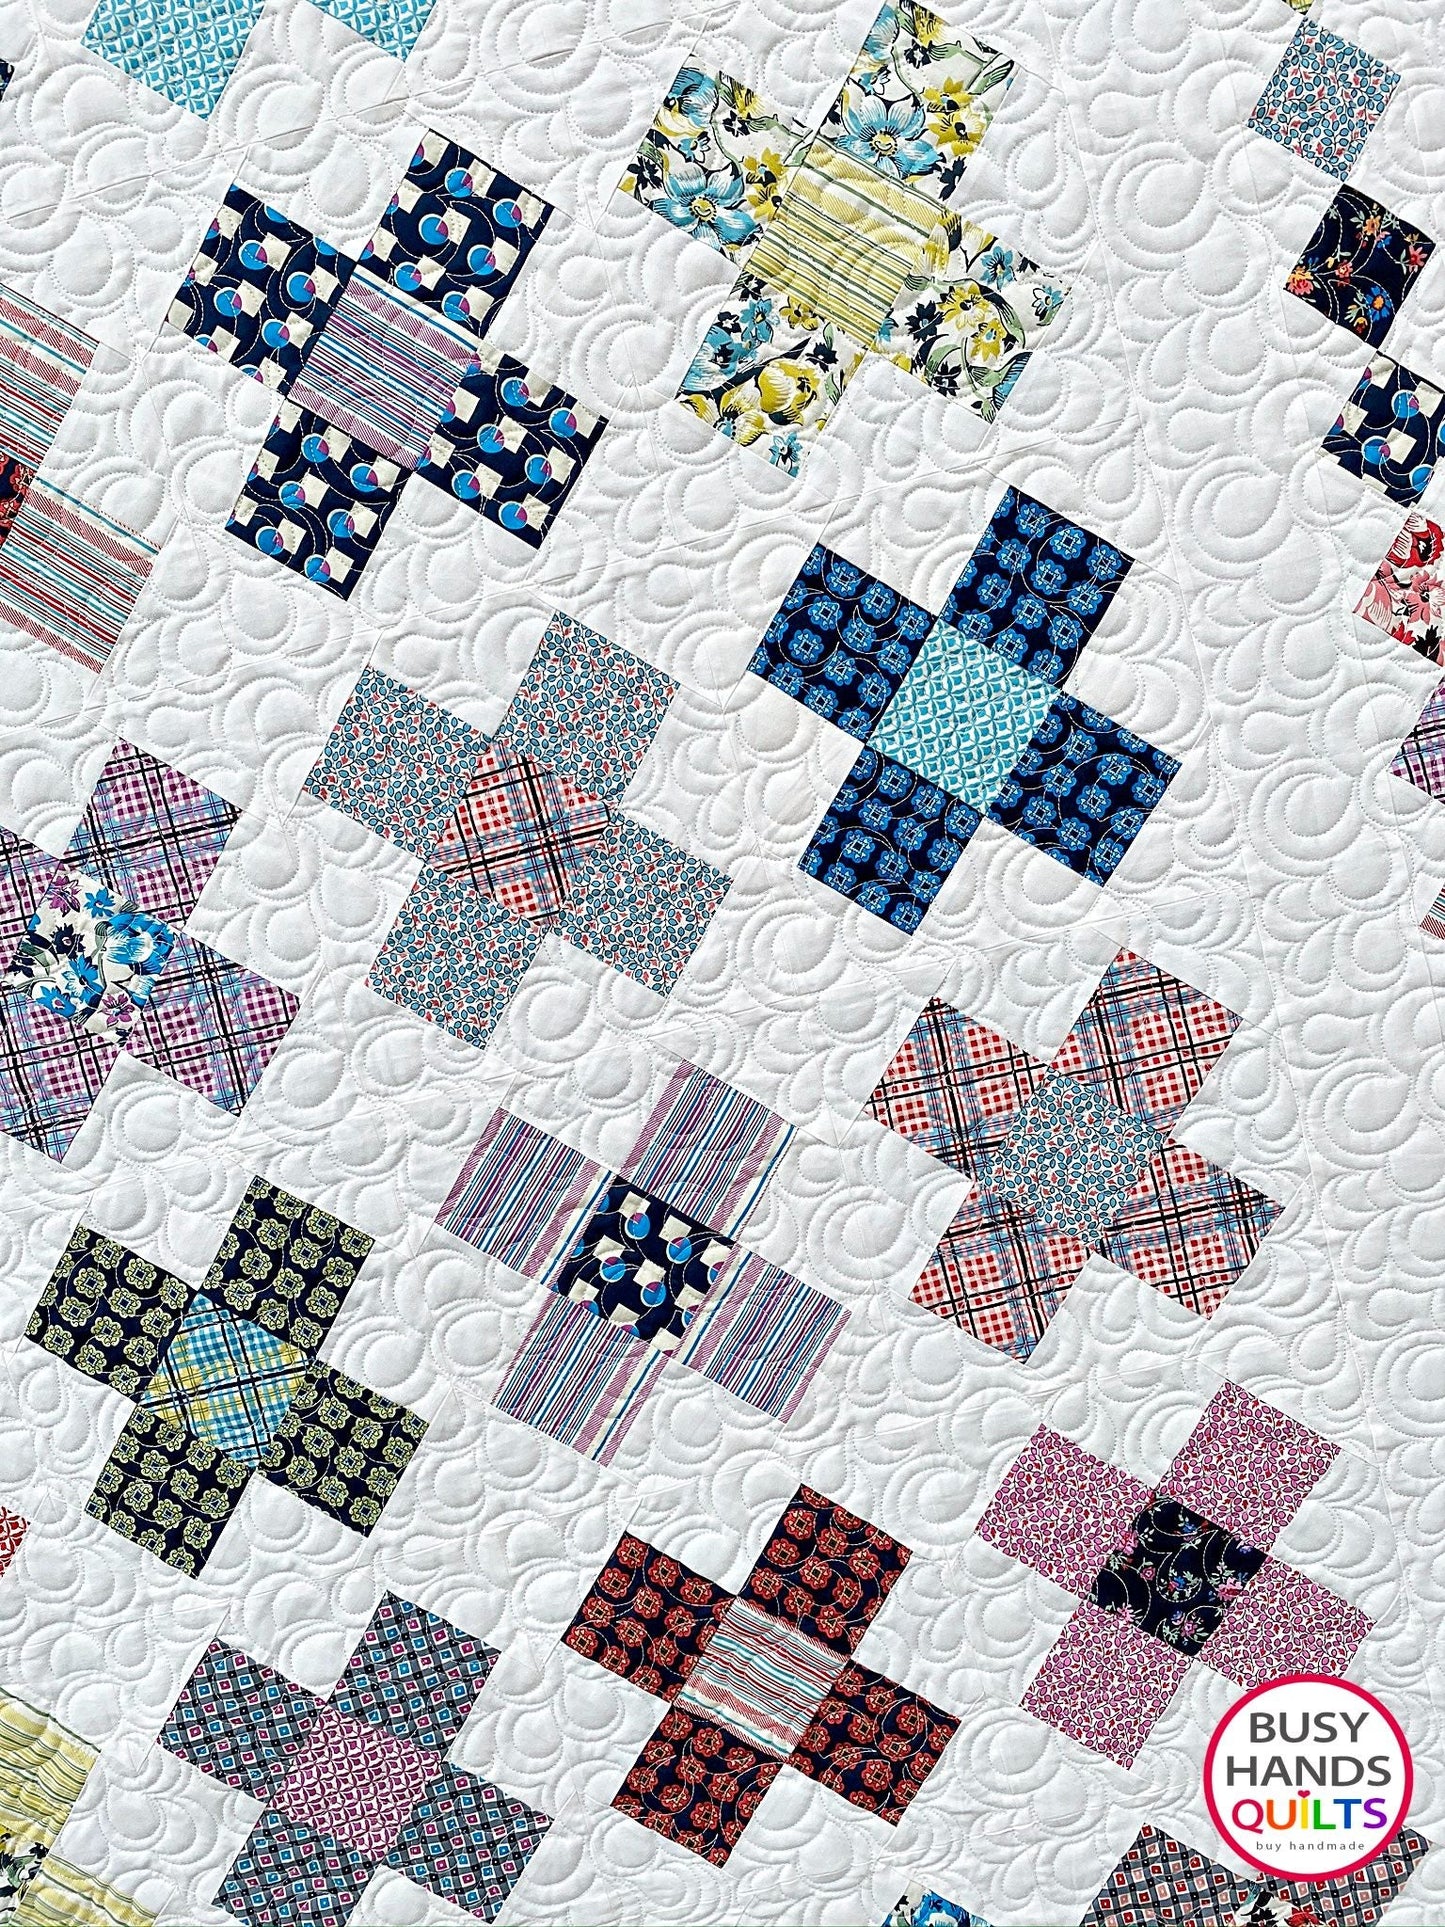 Belle Quilt Pattern PDF DOWNLOAD Busy Hands Quilts $12.99